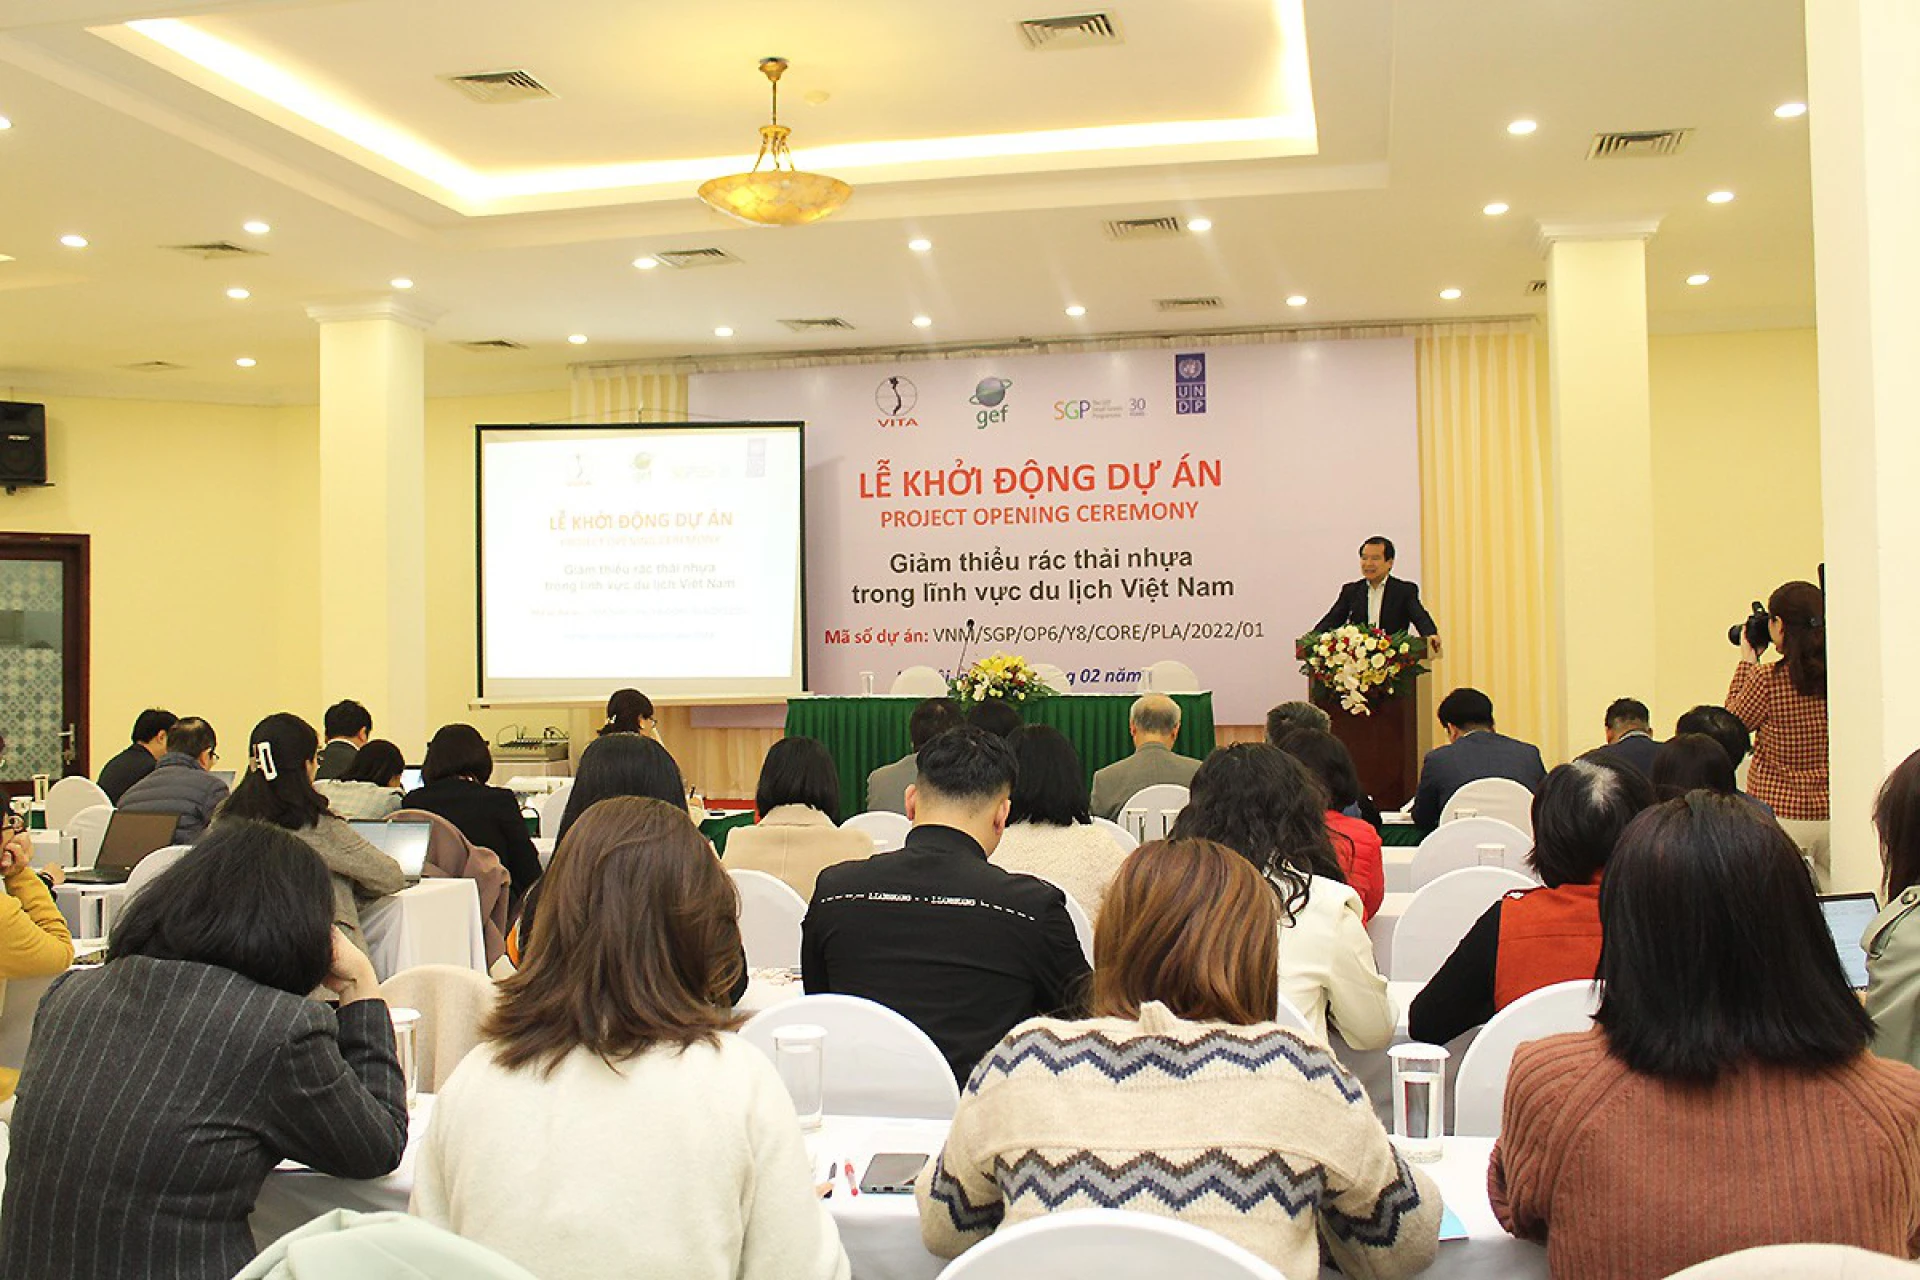 Project Opening Ceremony of reducing plastic waste in Vietnam tourism sector